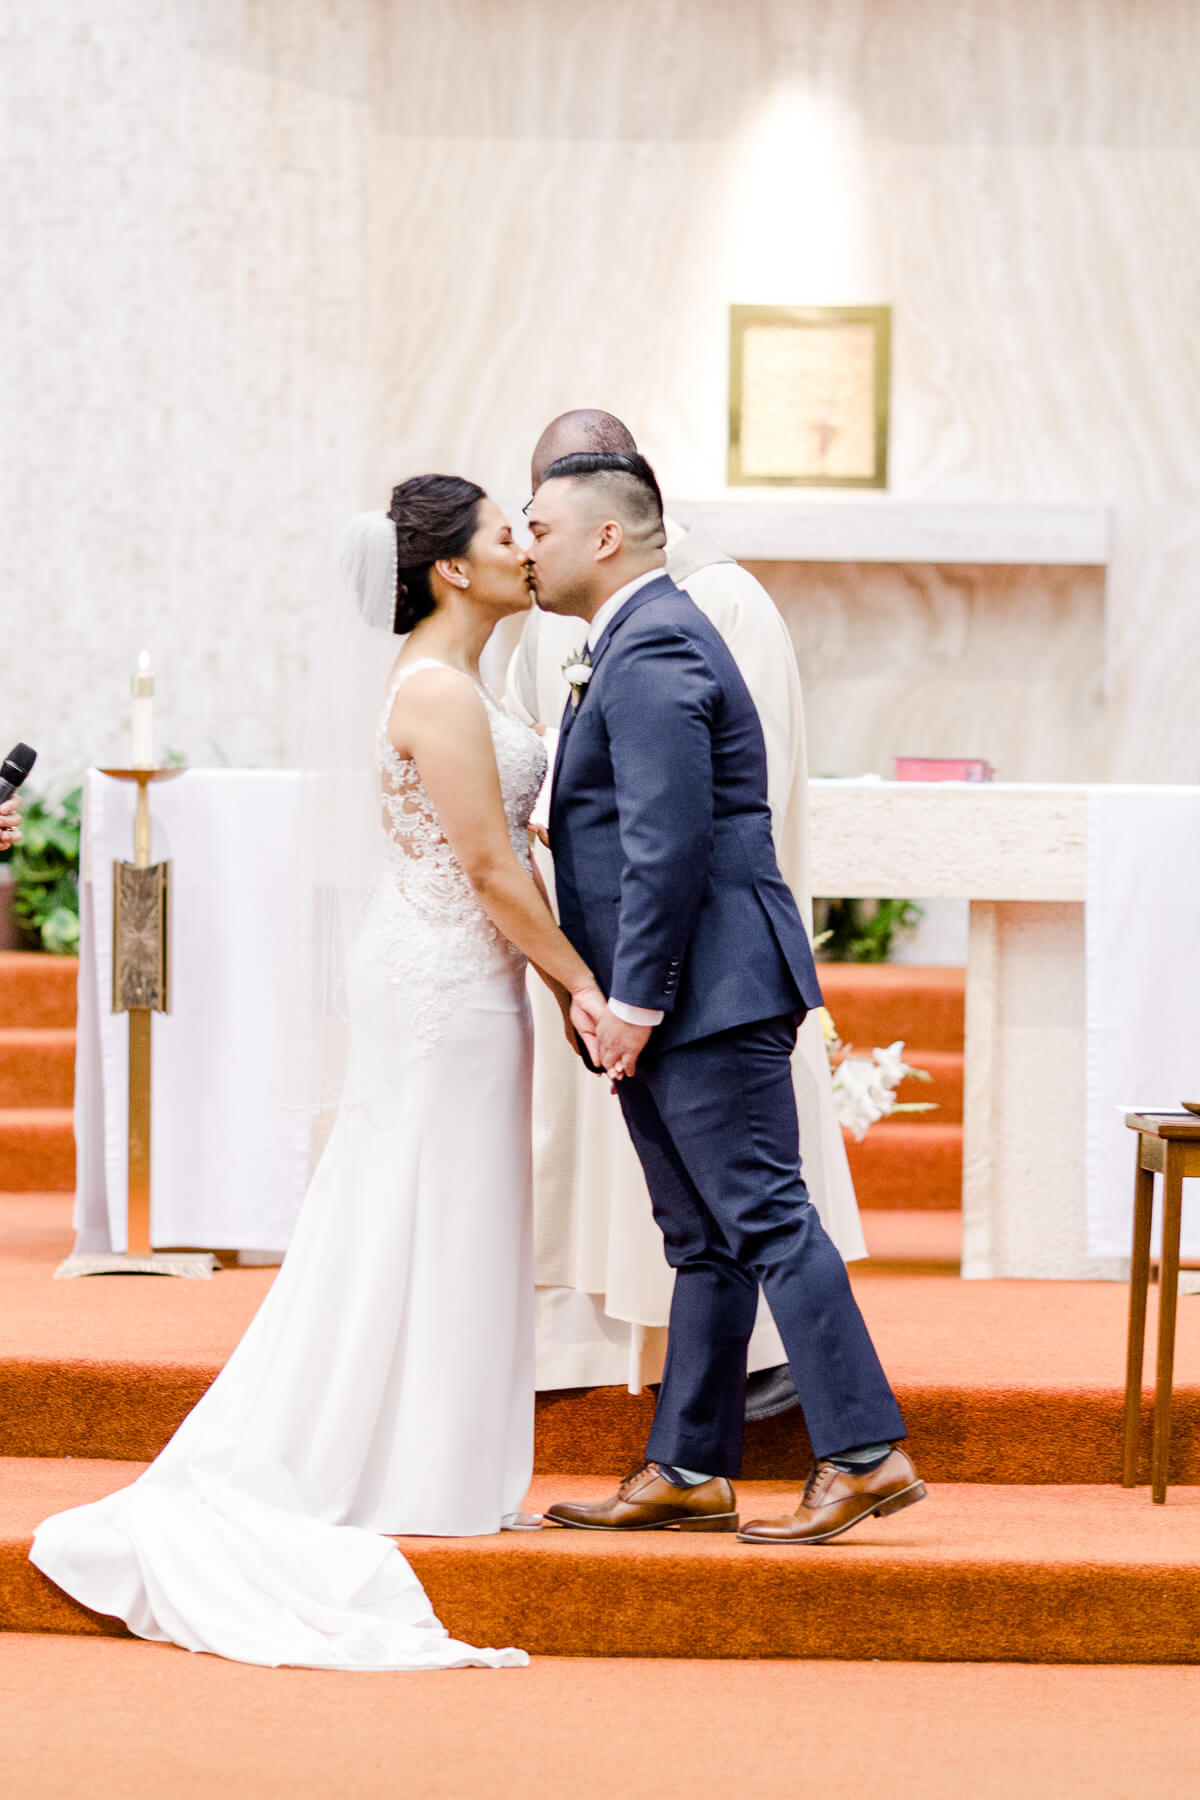 Bride and groom kiss at the altar at their Catholic winter wedding